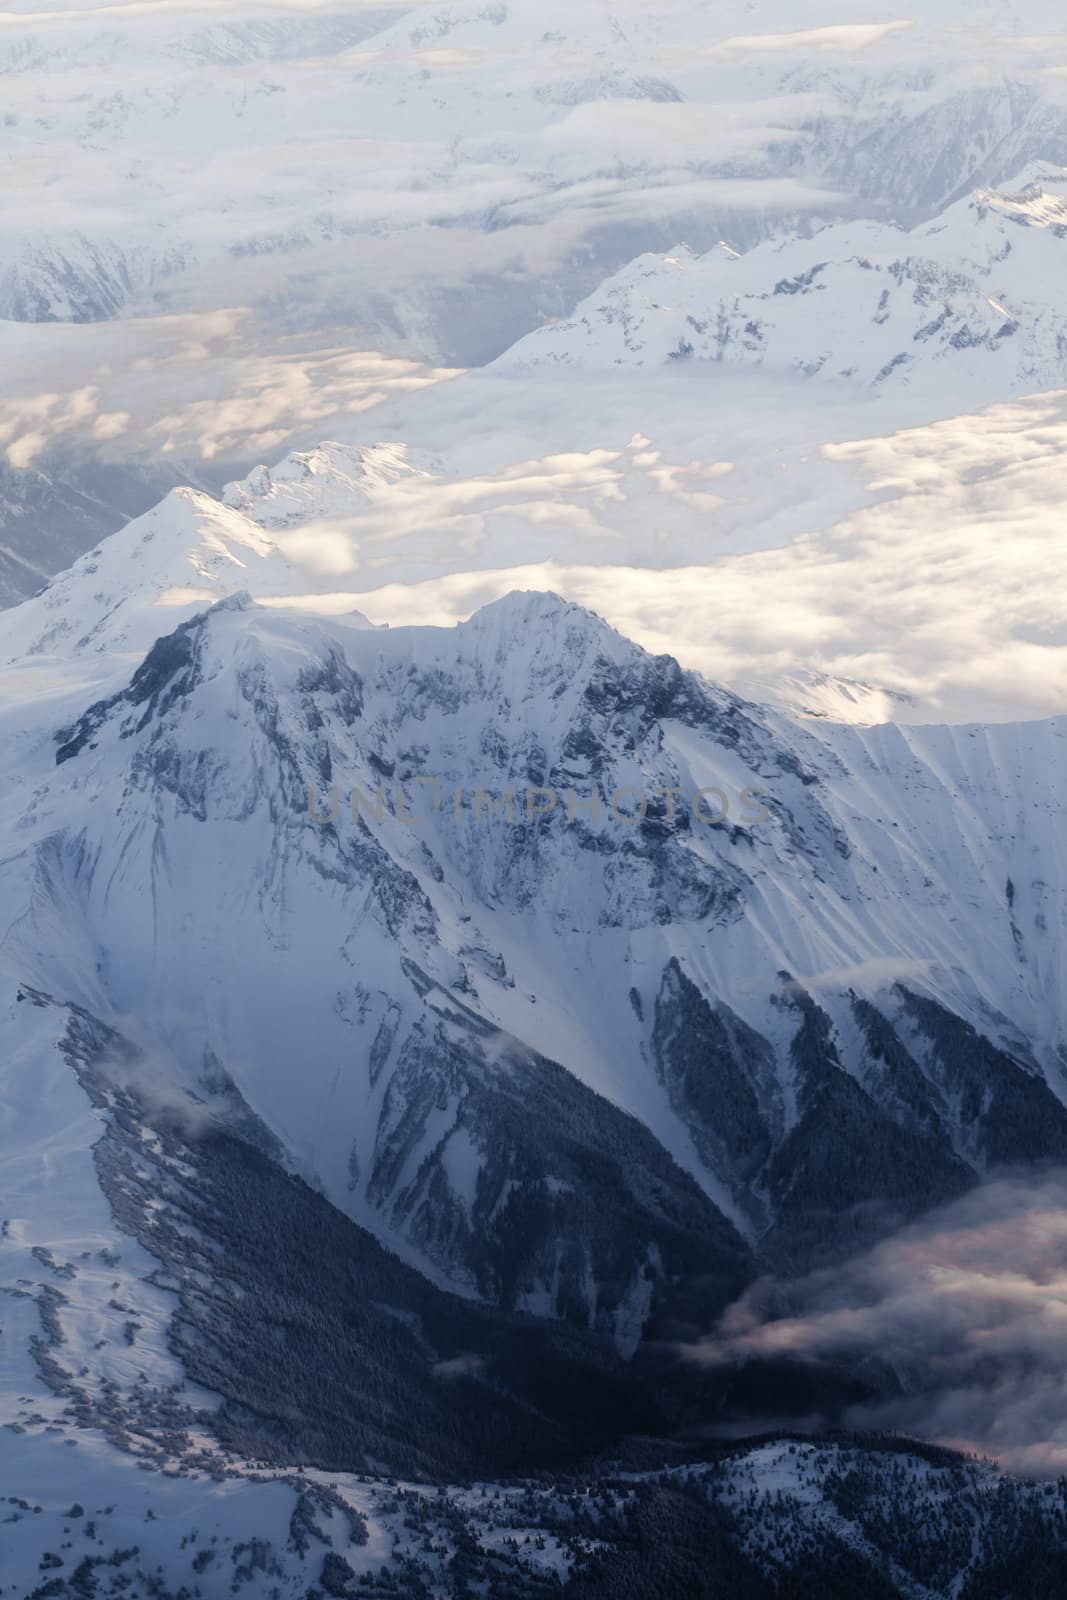 Snow covered moutain peaks perfect for heli-skiing in British Columbia, Canada.